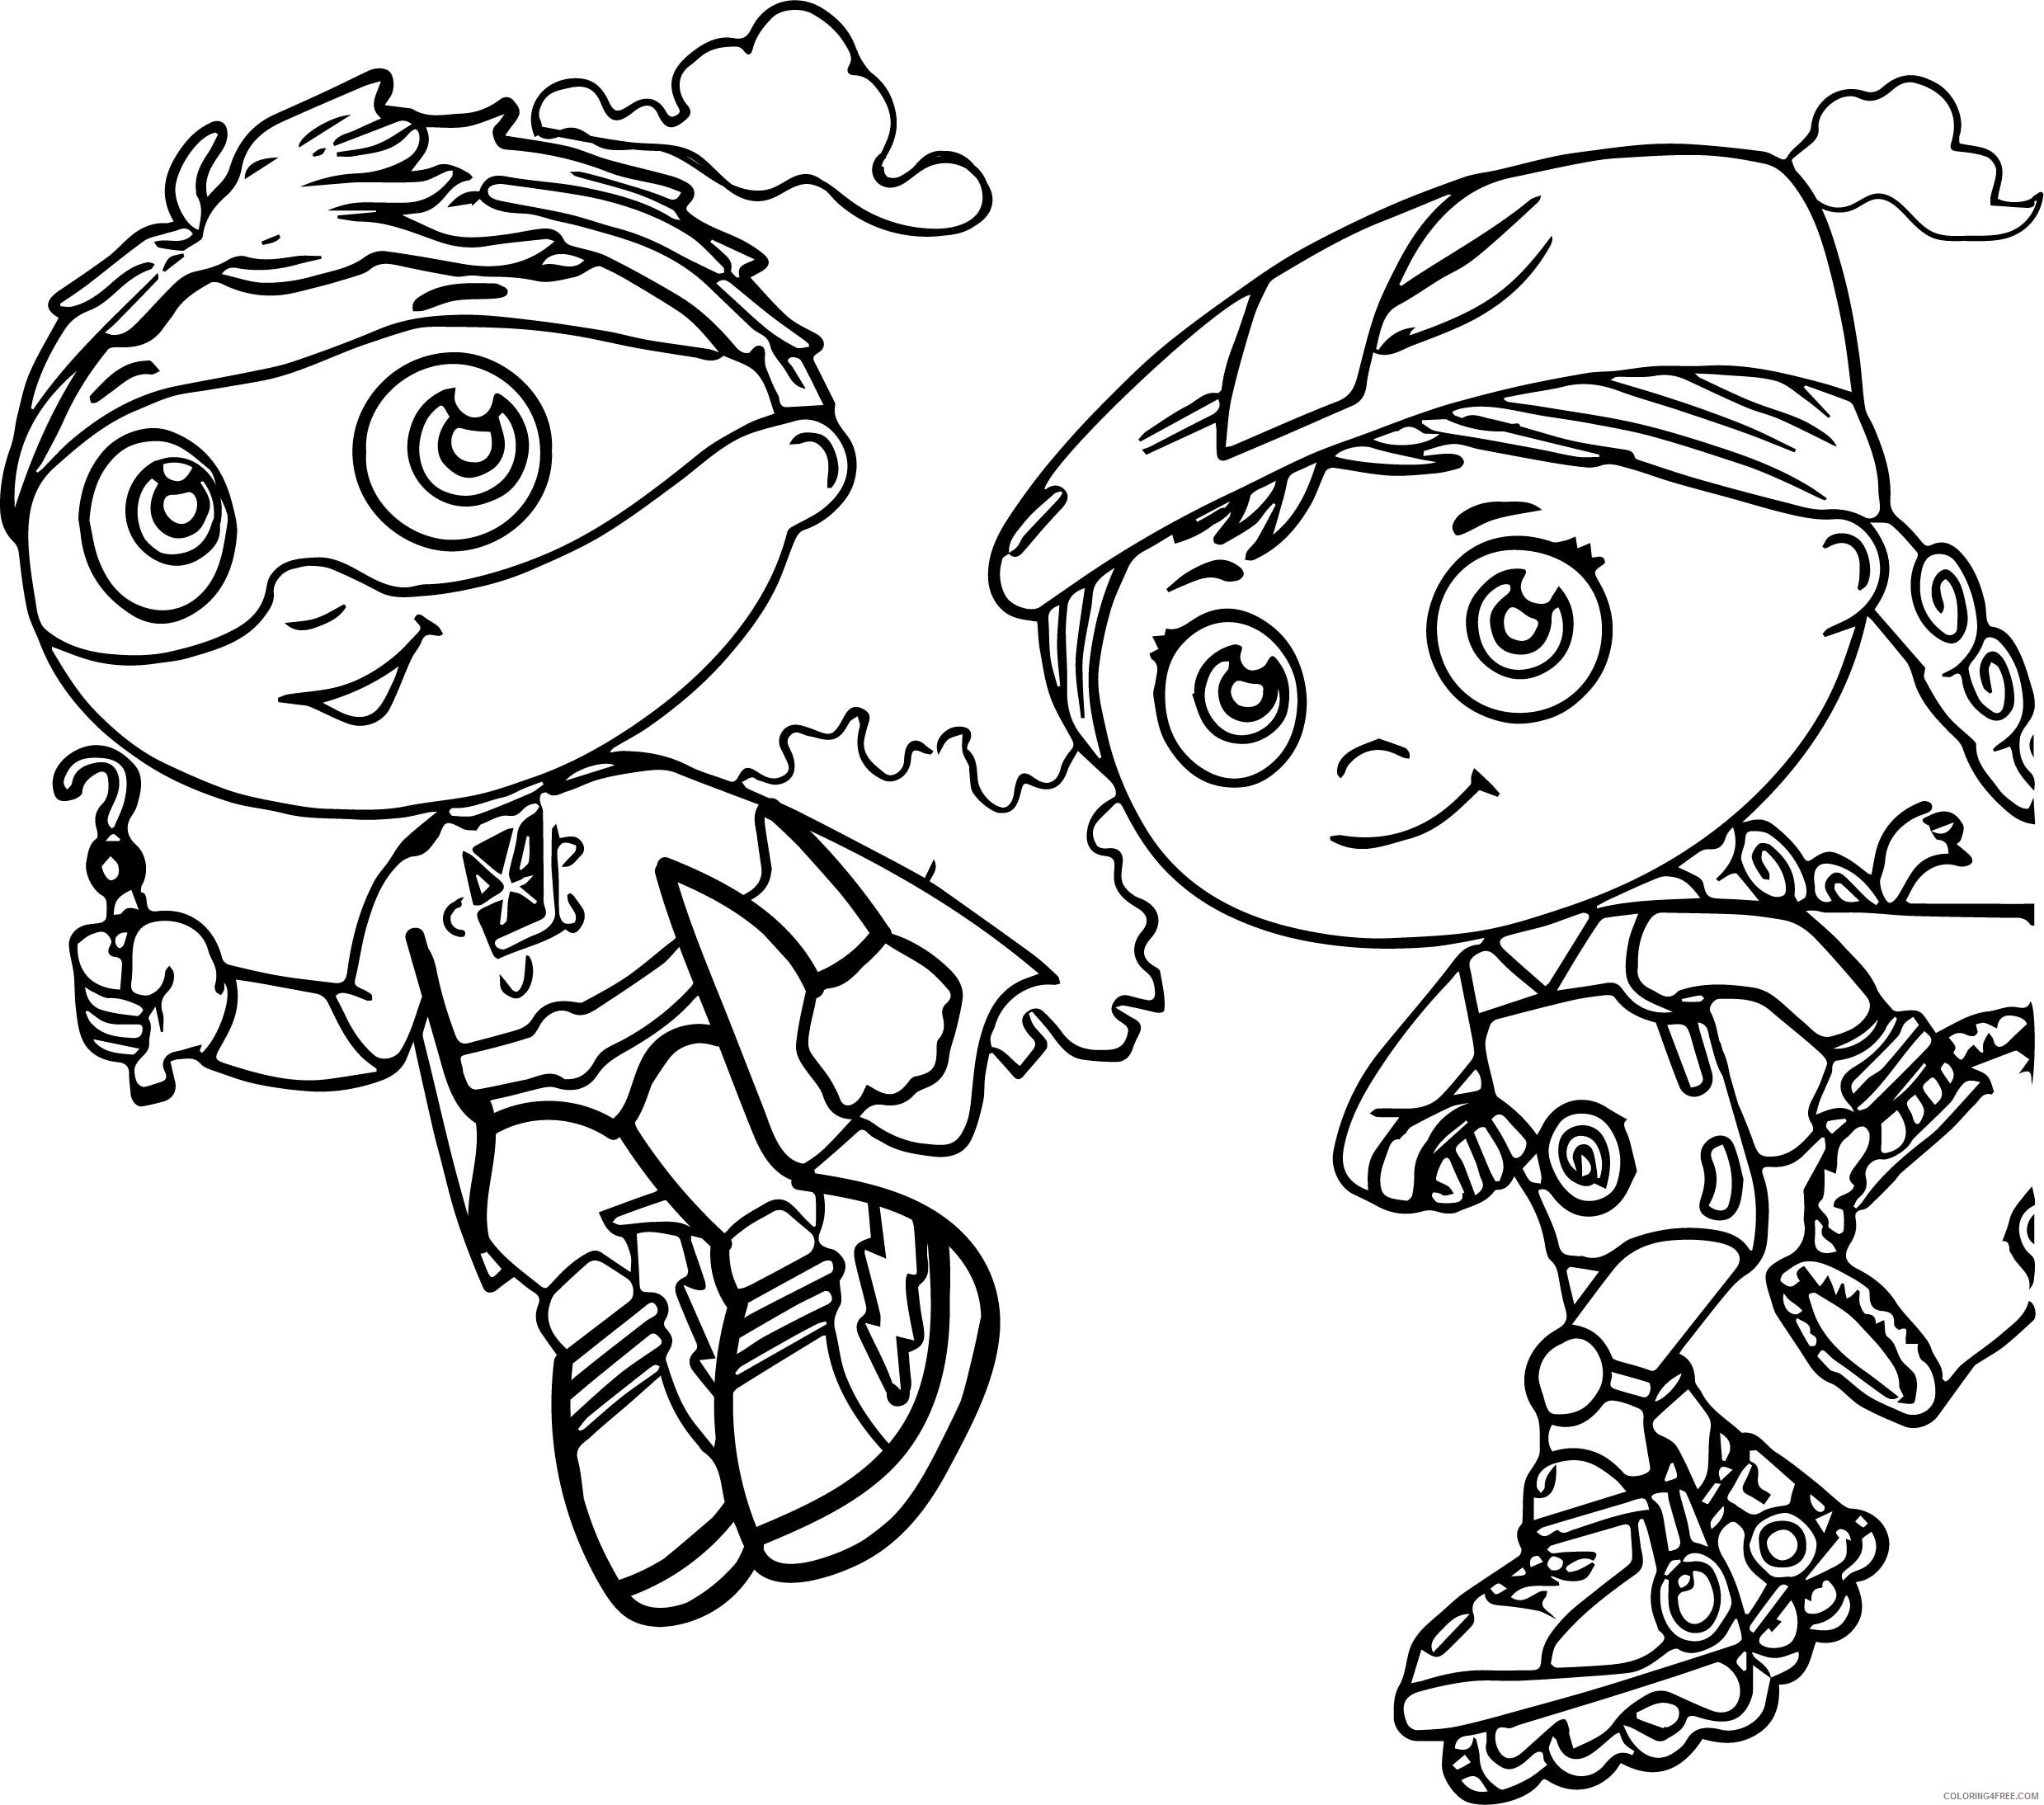 Super Why Coloring Pages TV Film Super Why Printable 2020 08332 Coloring4free